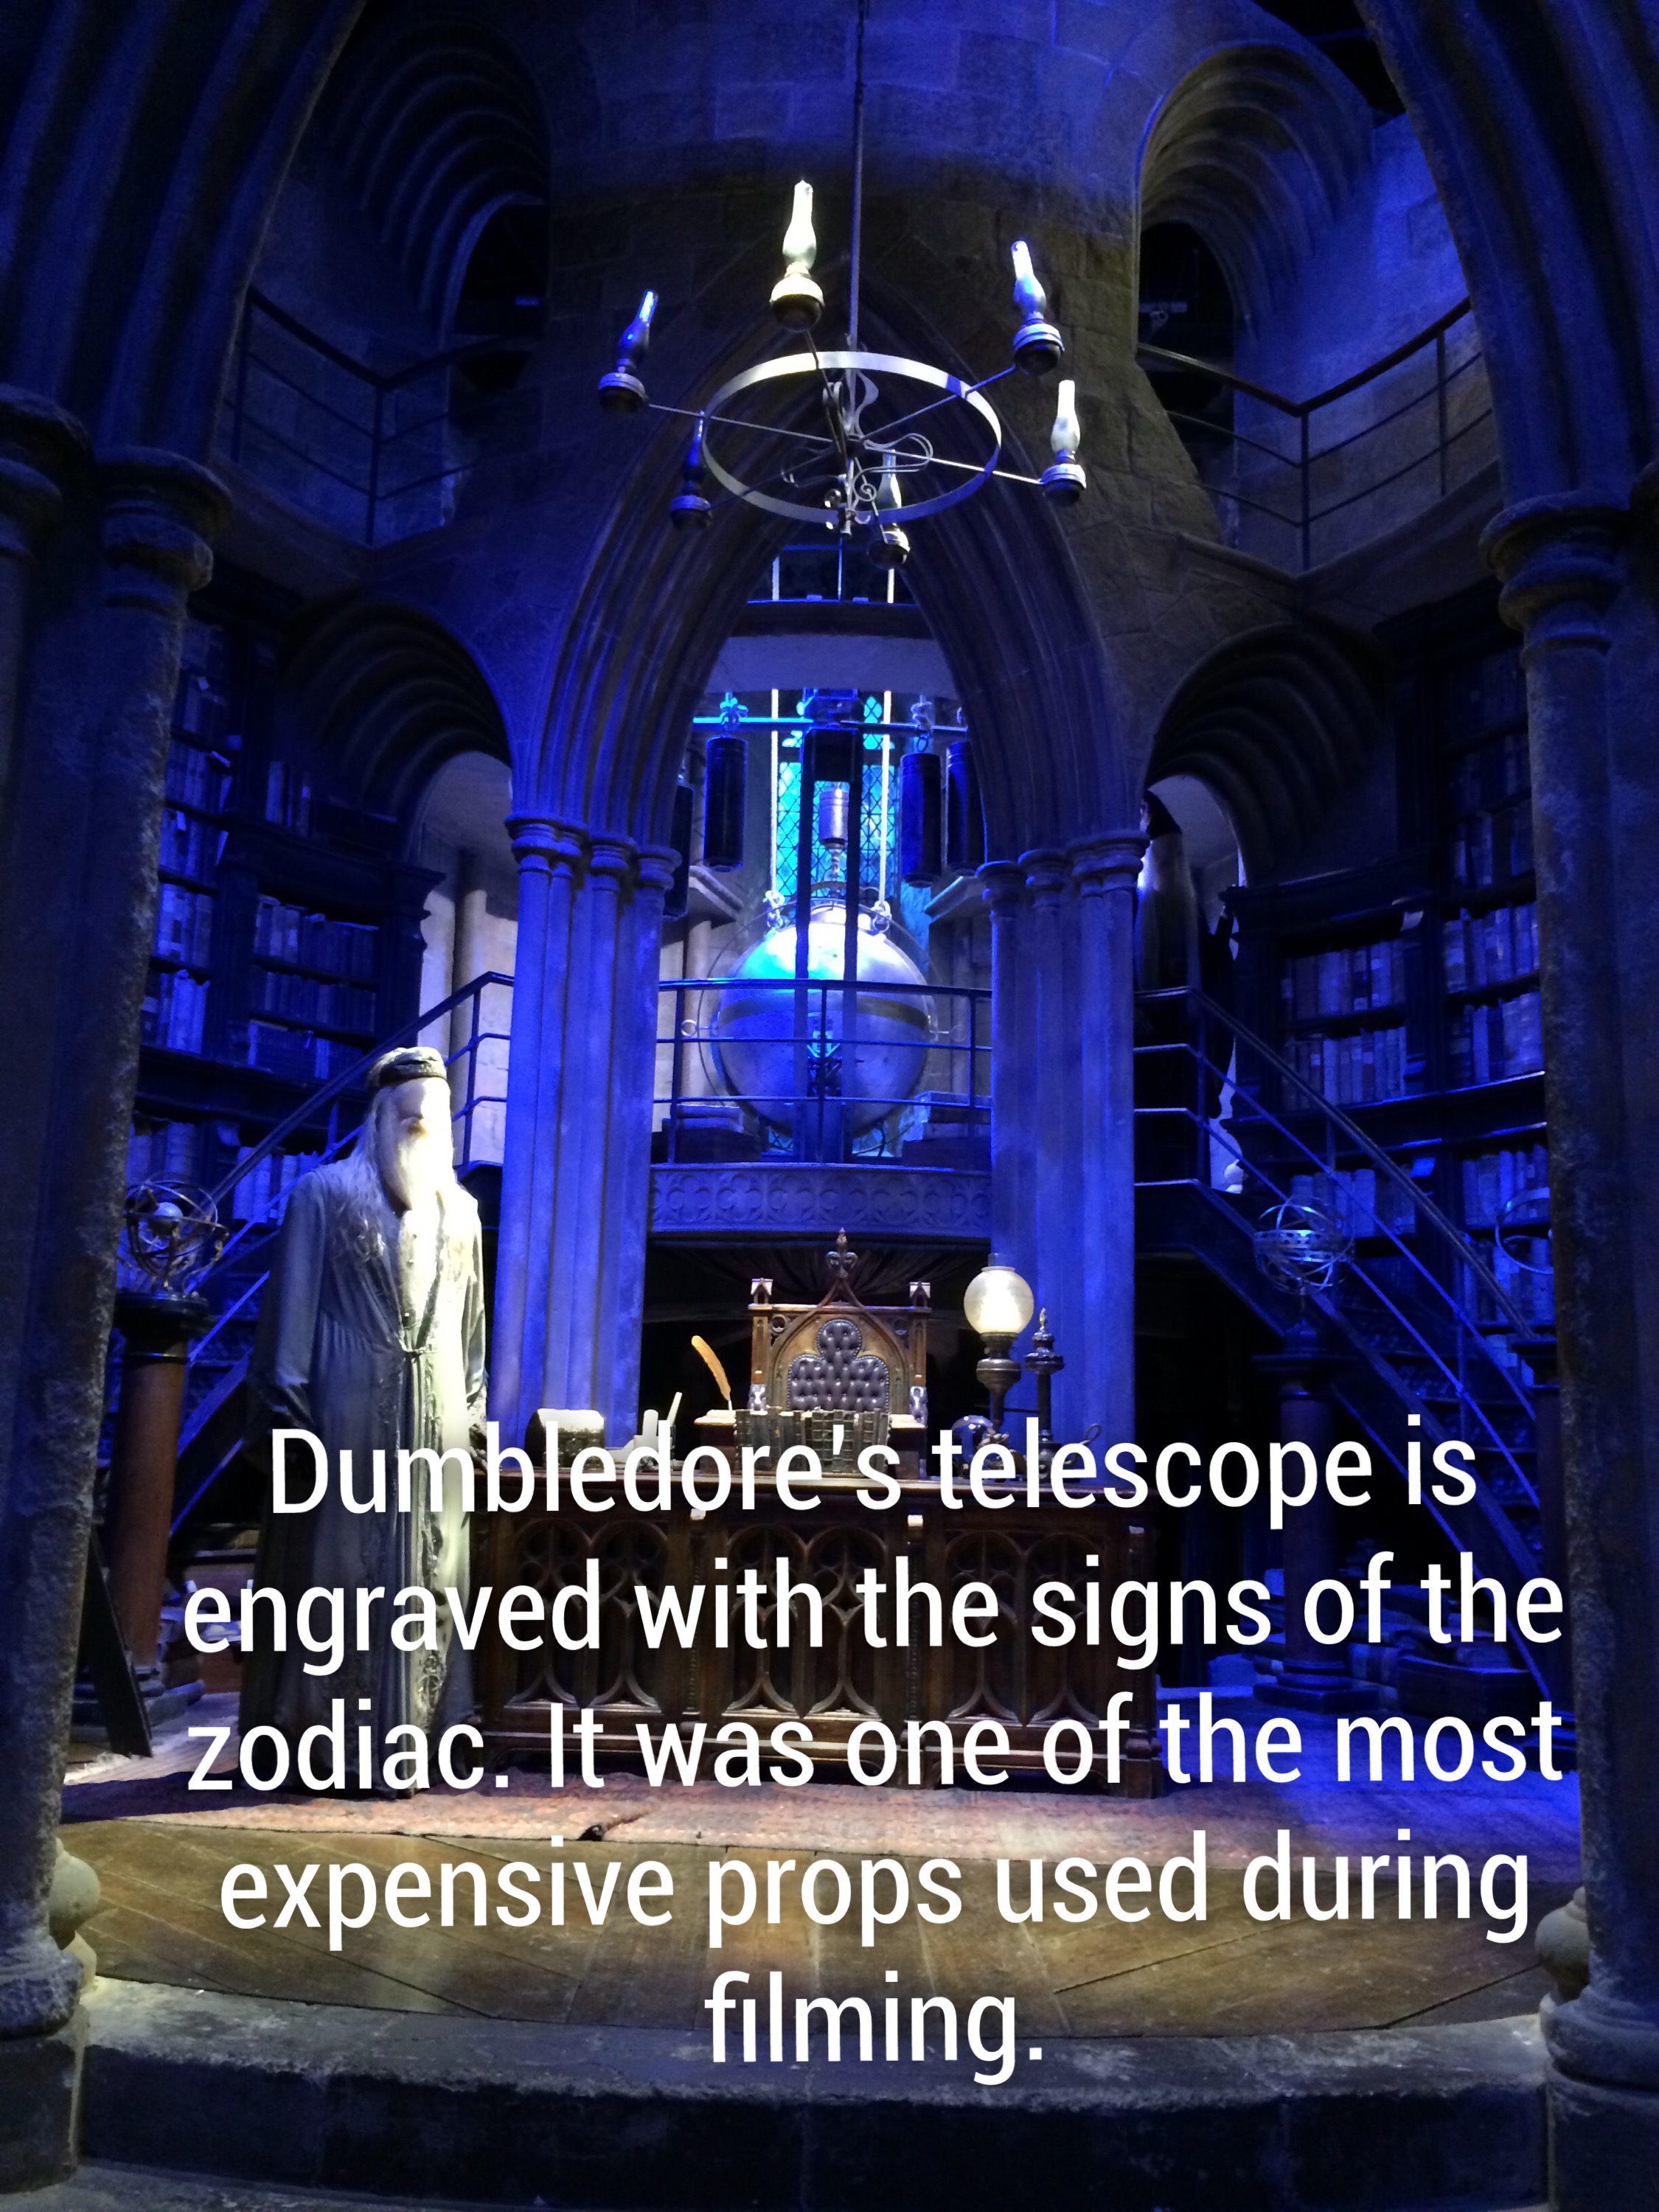 warner bros. studios, leavesden - Dumbledore's telescope is engraved with the signs of the Zodiac. It was one of the most expensive props used during filming.